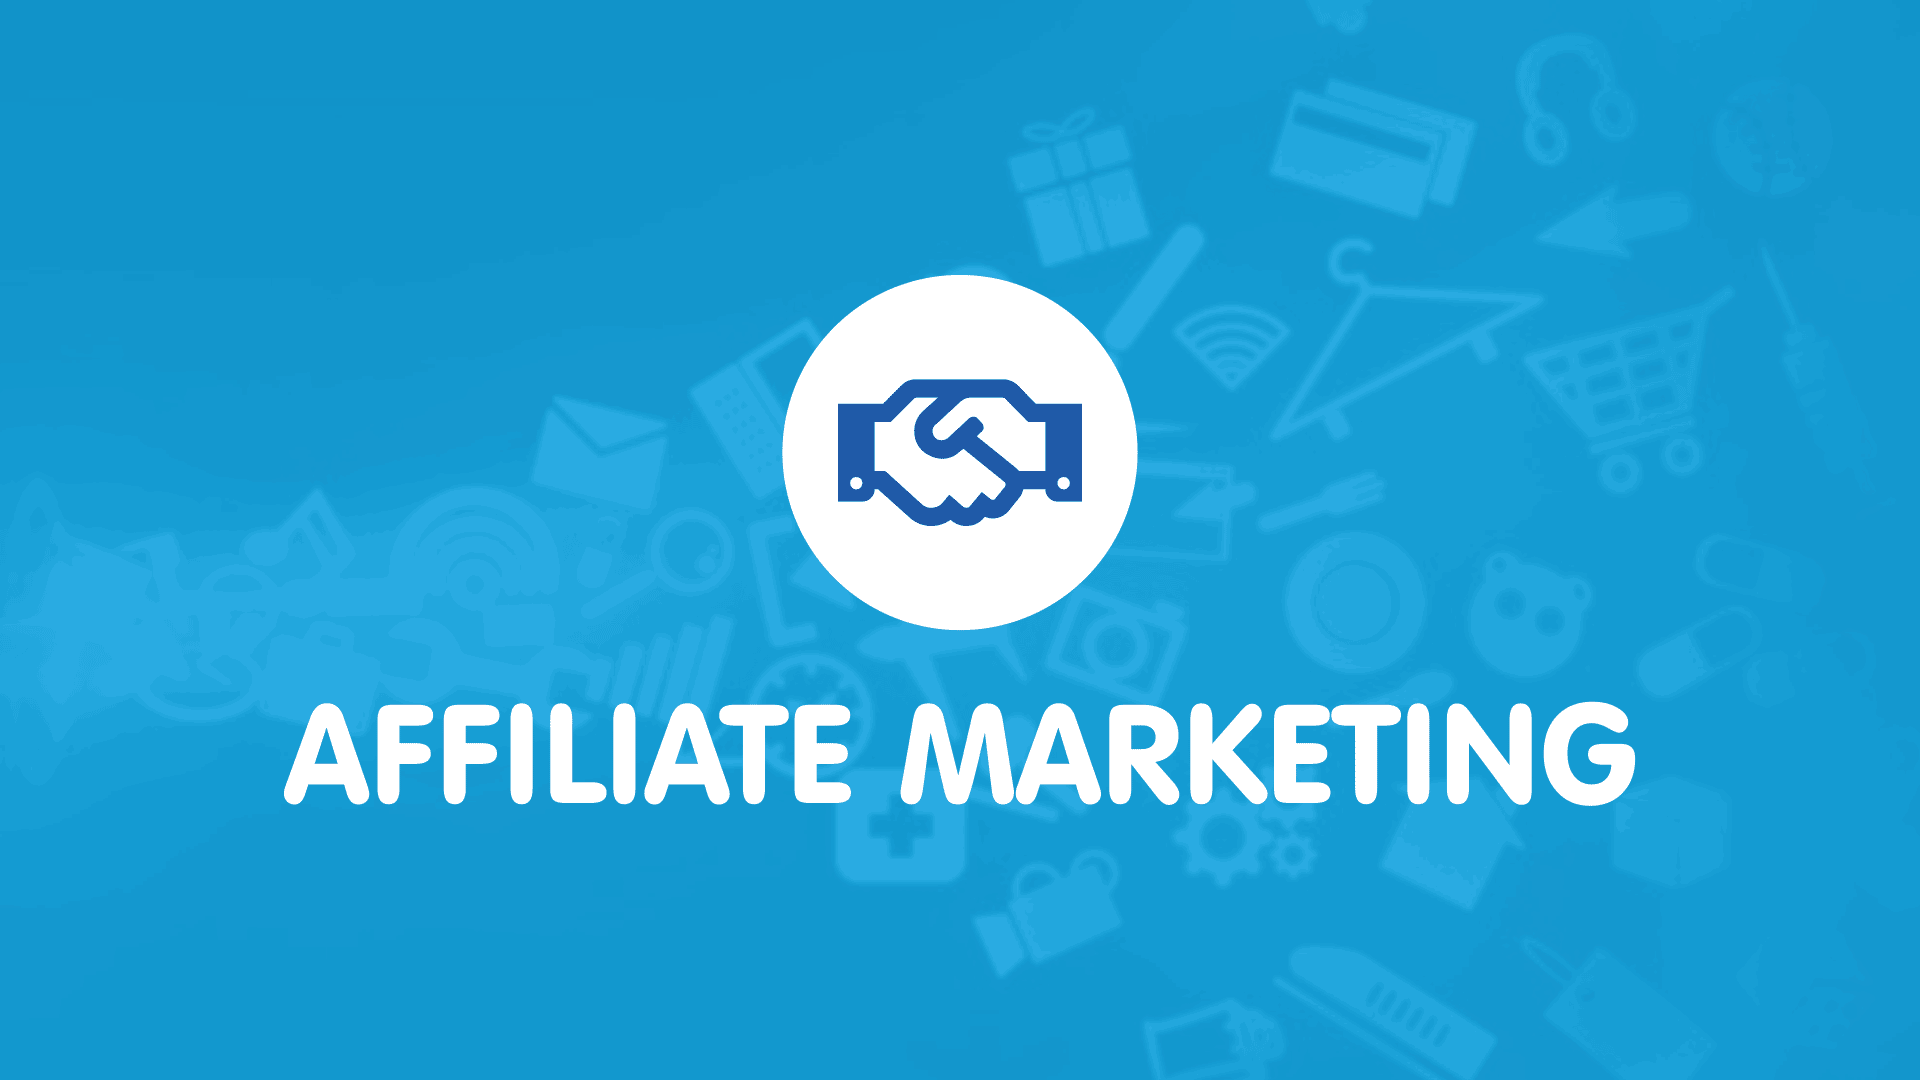 Monetize Your Website with Affiliate Marketing, Top Tips 4 U